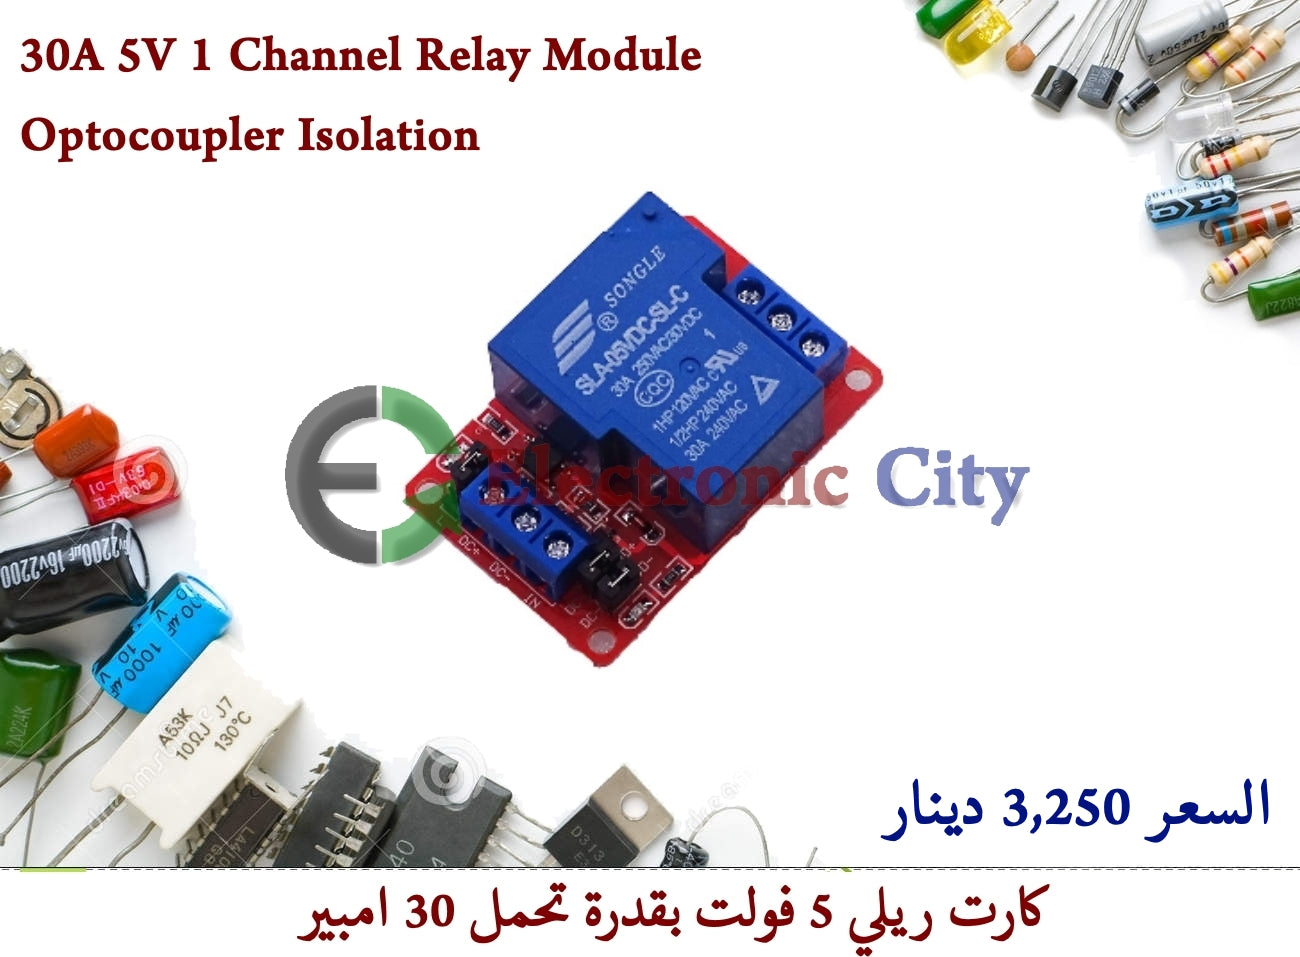 30A 5V 1 Channel Relay Module Optocoupler Isolation  #M5 011066